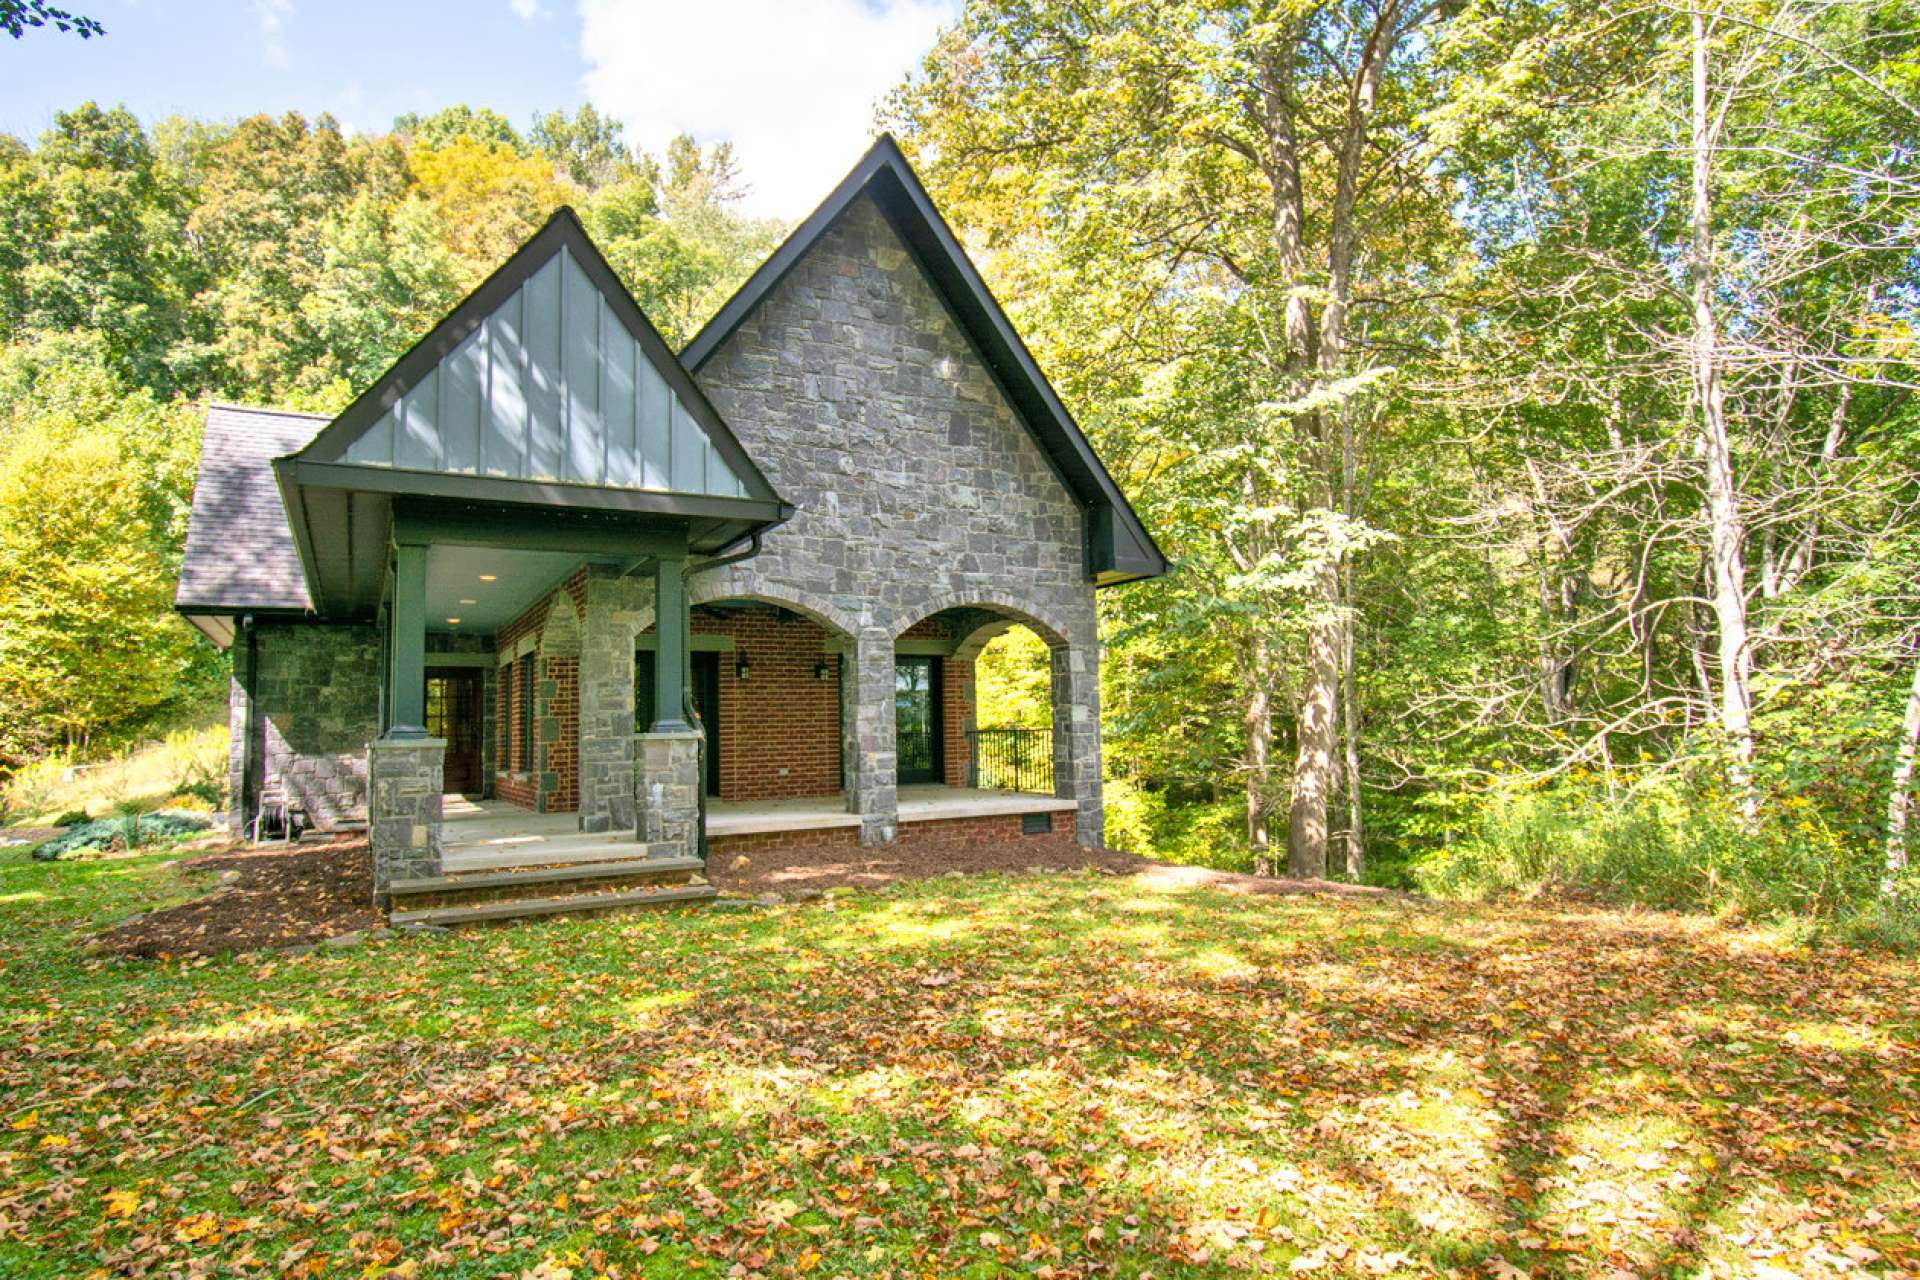 Welcome to your furnished NC Mountain Home with acreage for privacy.